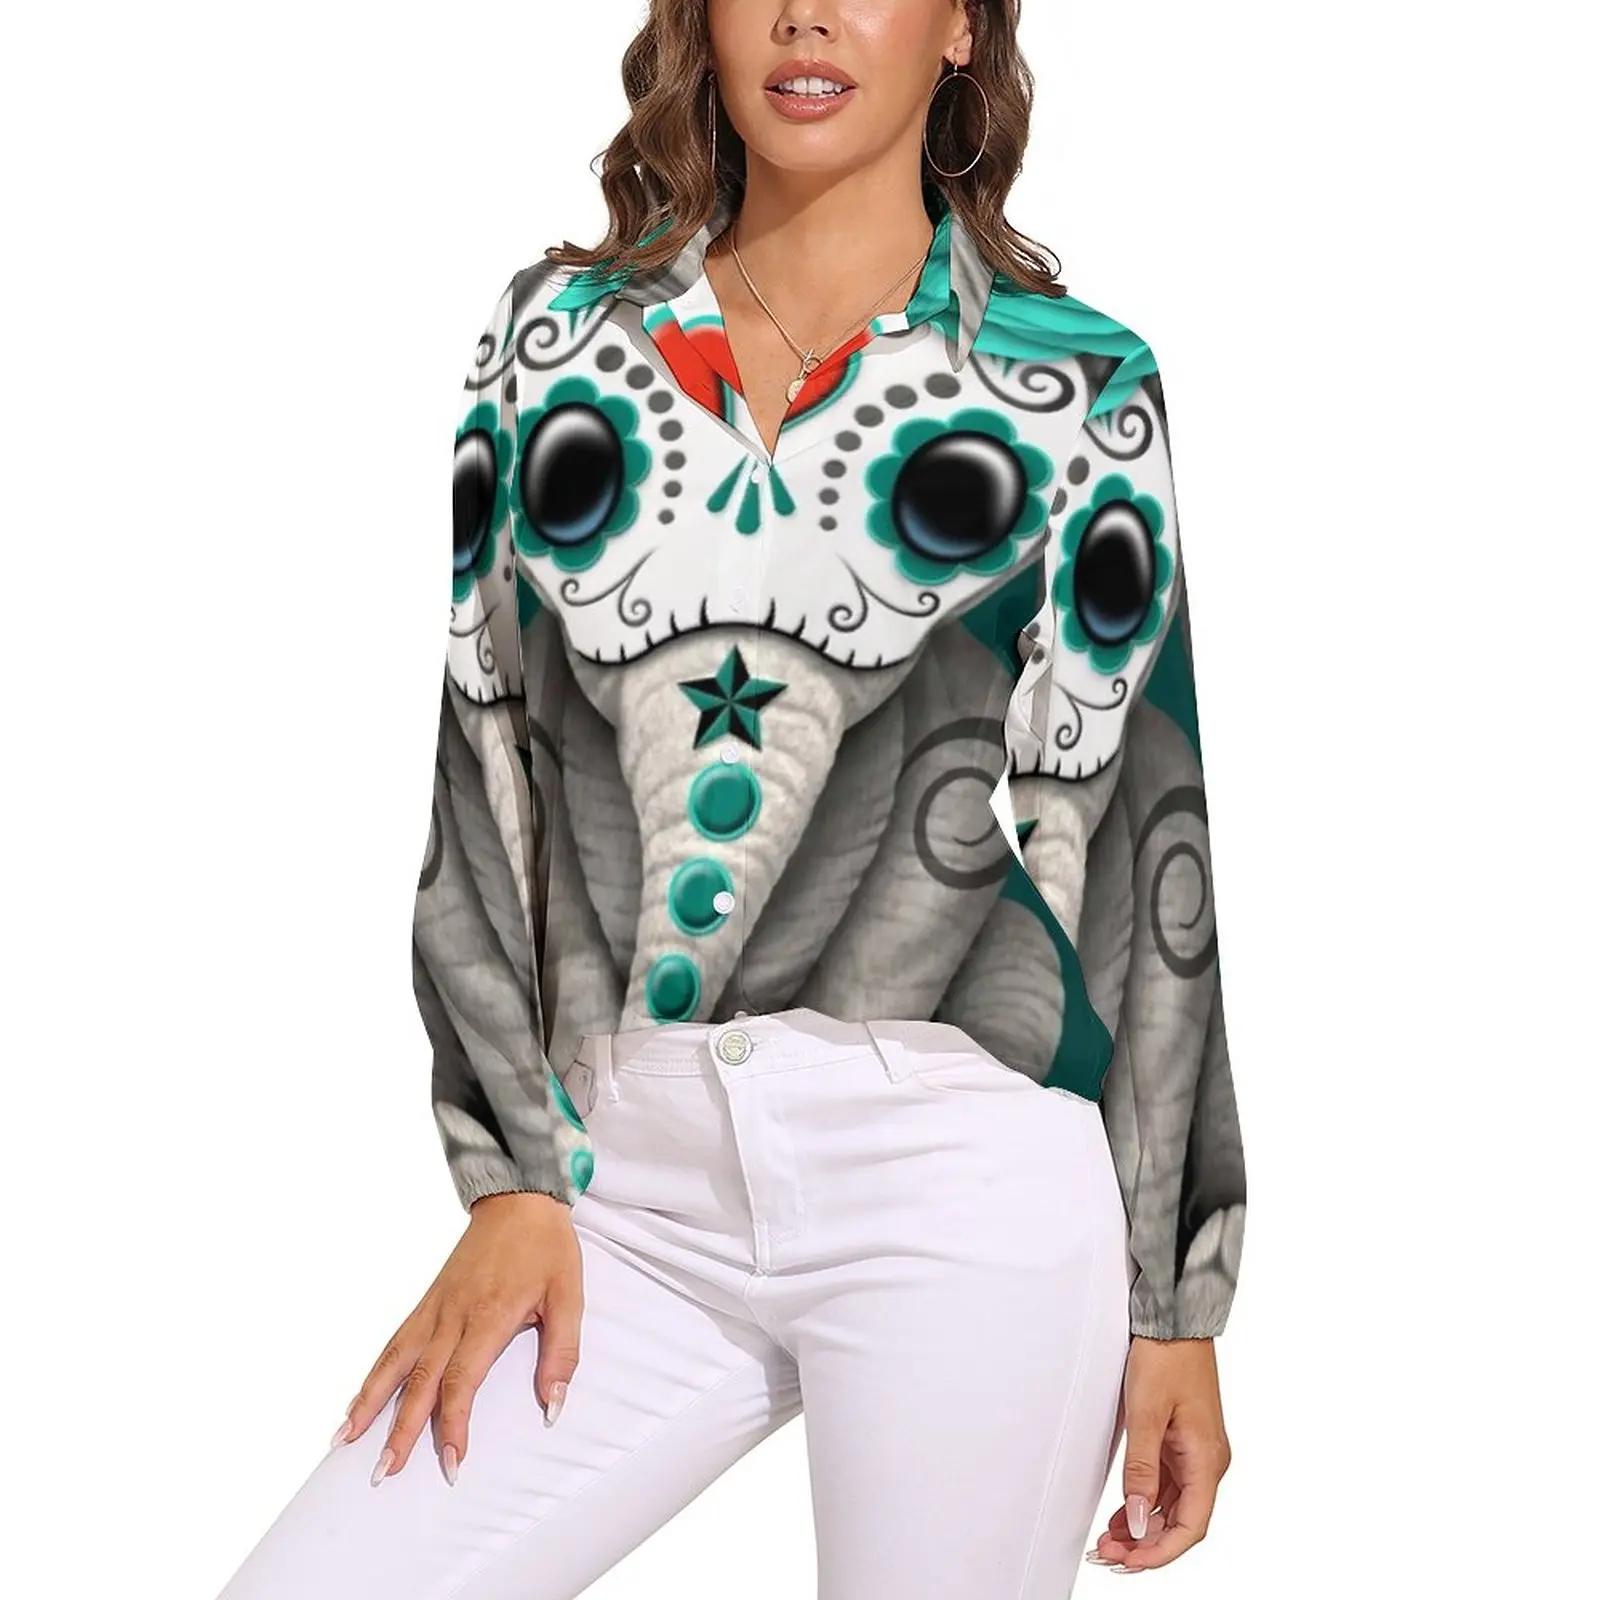 

Sugar Skull Baby Elephant Blouse Teal Blue Day of The Dead Office Work Design Blouses Street Wear Shirt Long-Sleeve Oversize Top